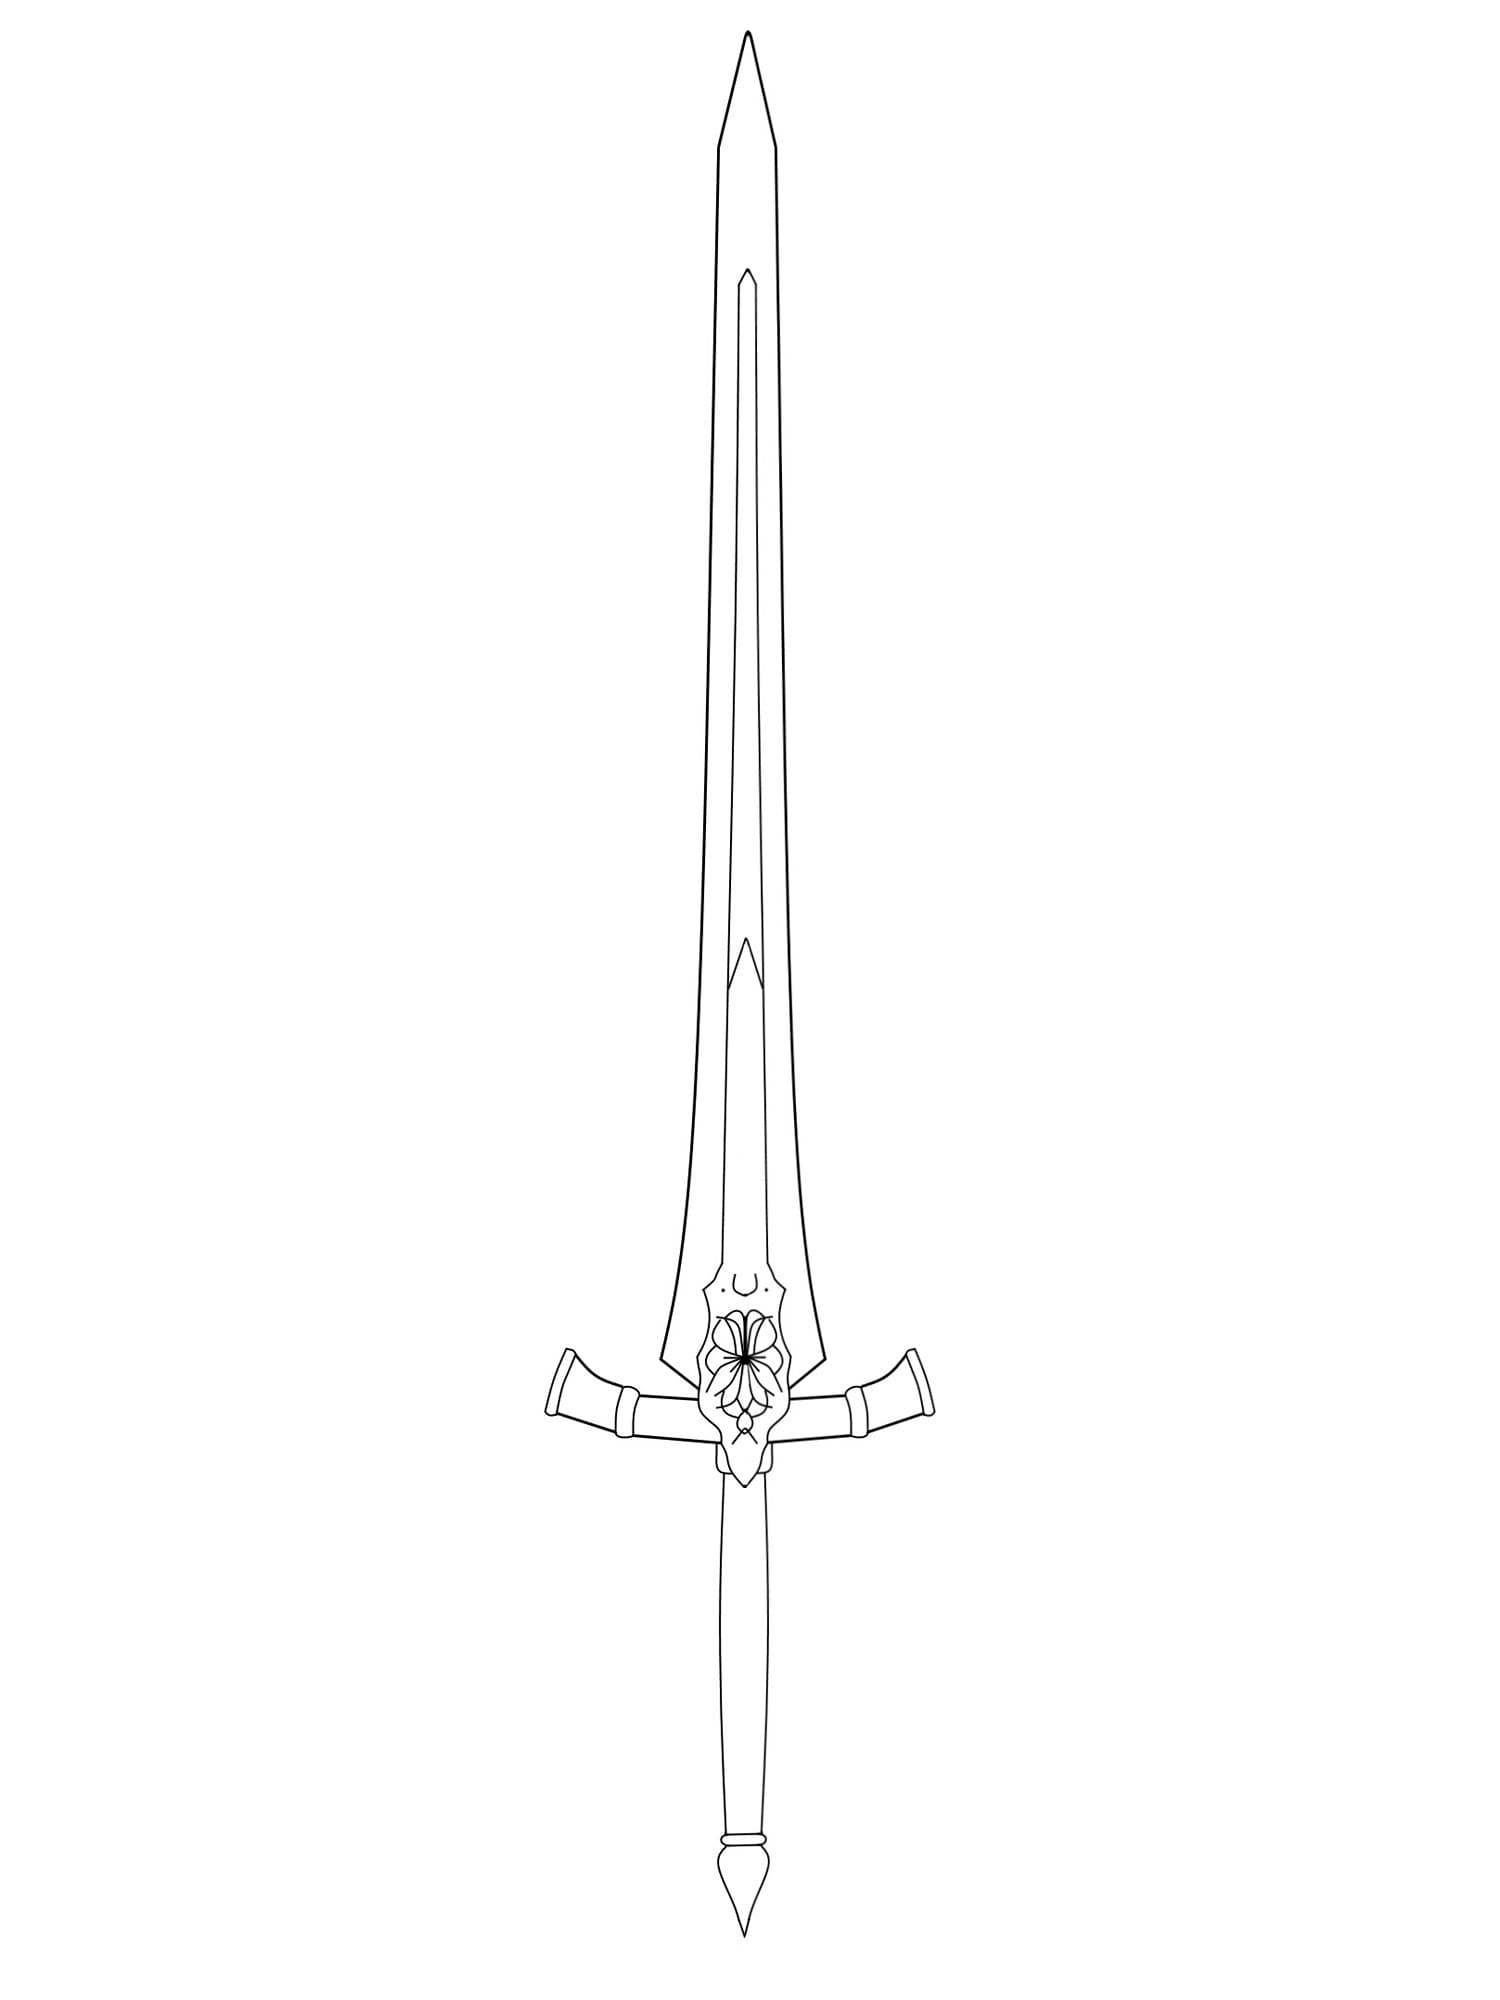 New Blade Sword Coloring Page